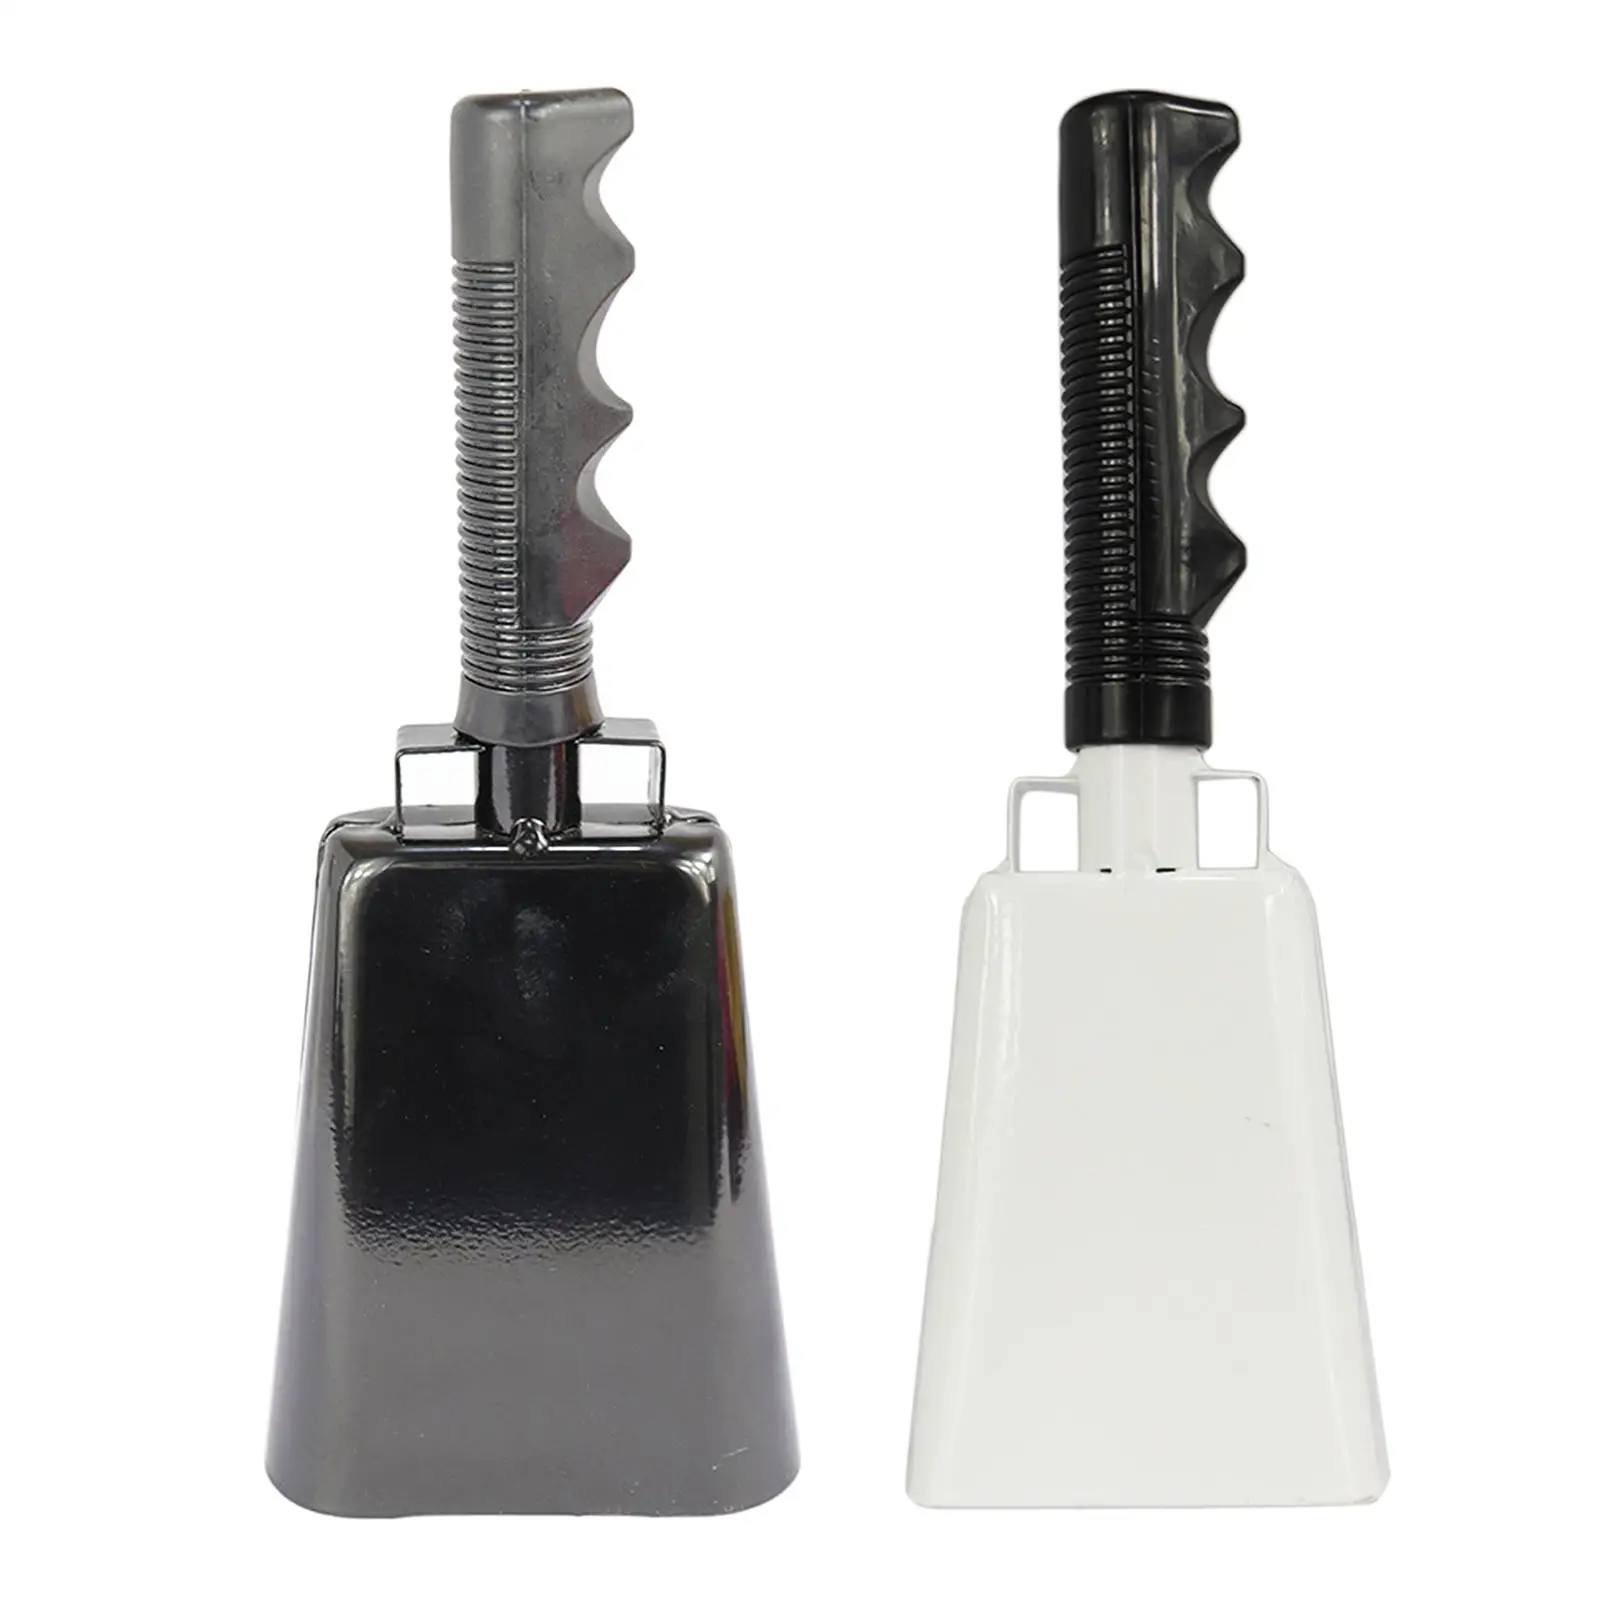 Musical Hand Bells Service Call Bell Percussion with Handles Music Instrument for Rhythm Concert